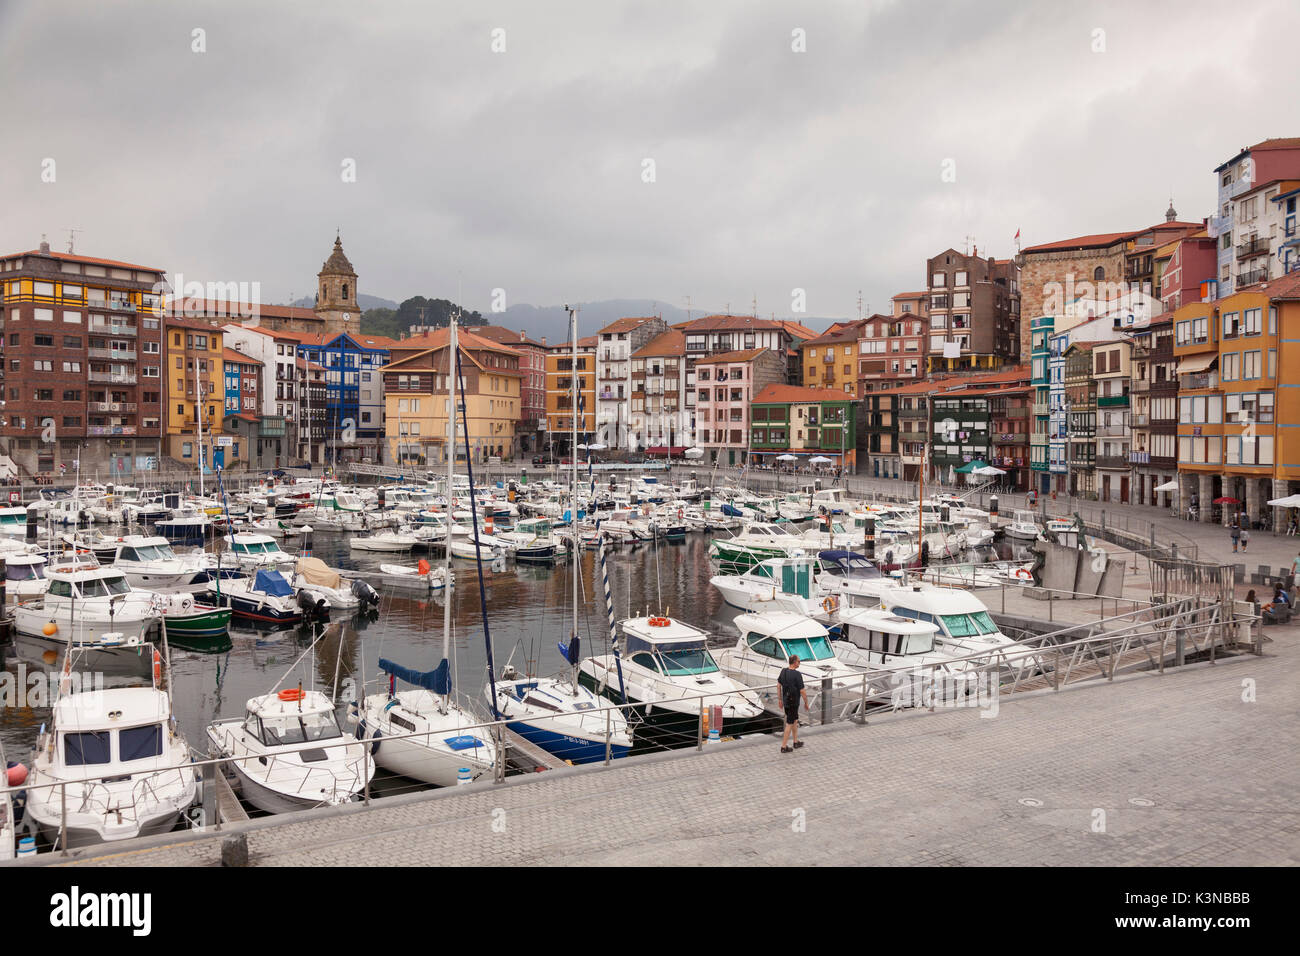 Bermeo, province of Biscay, Basque country, Northern Spain. View of harbour Stock Photo